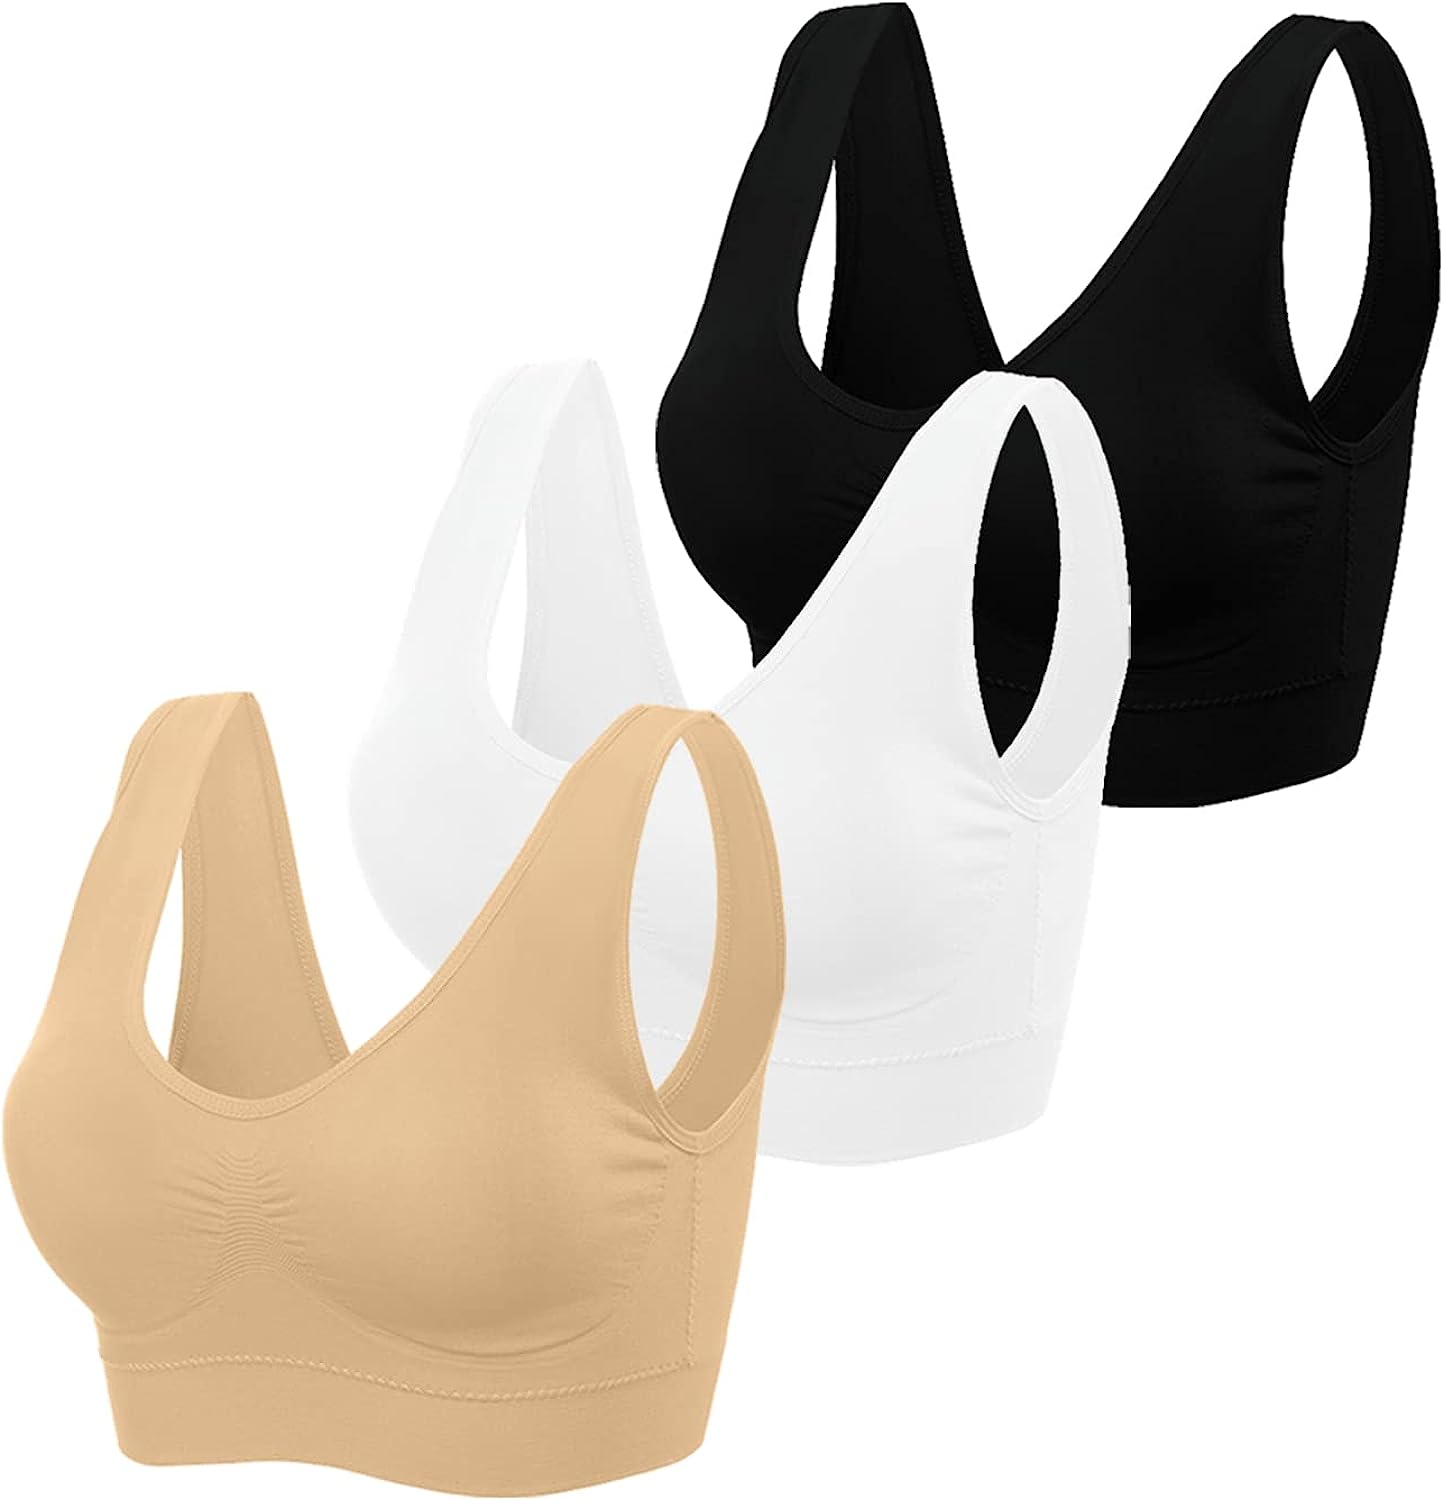 Sports Bras for Women Medium Support Yoga Gym Activewear Bras with